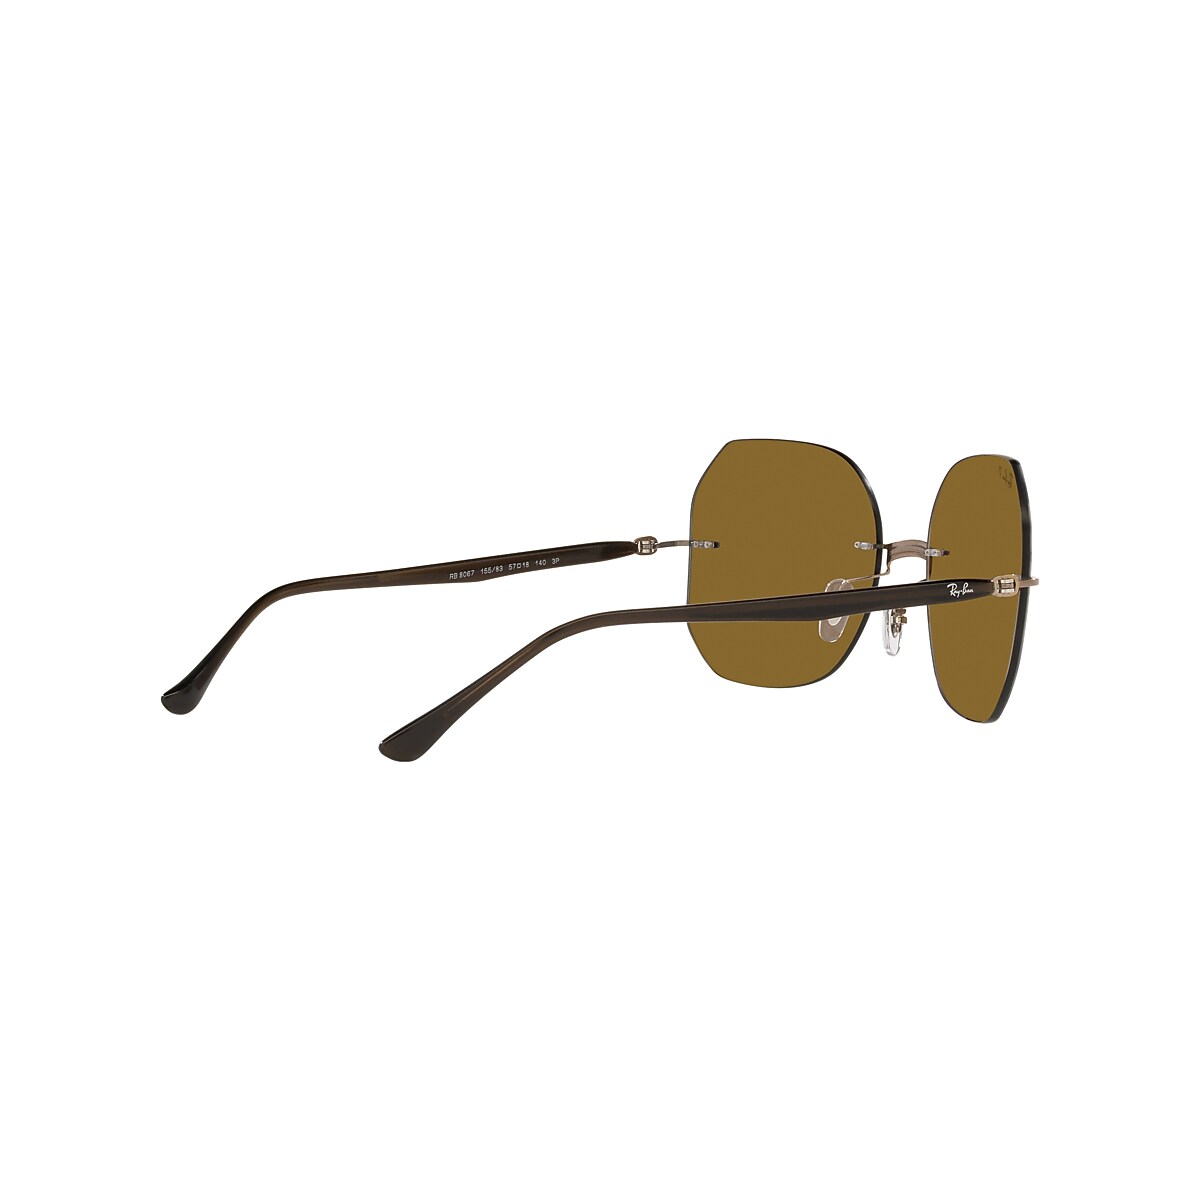 RB8067 TITANIUM Sunglasses in Brown and Brown - RB8067 | Ray-Ban® US